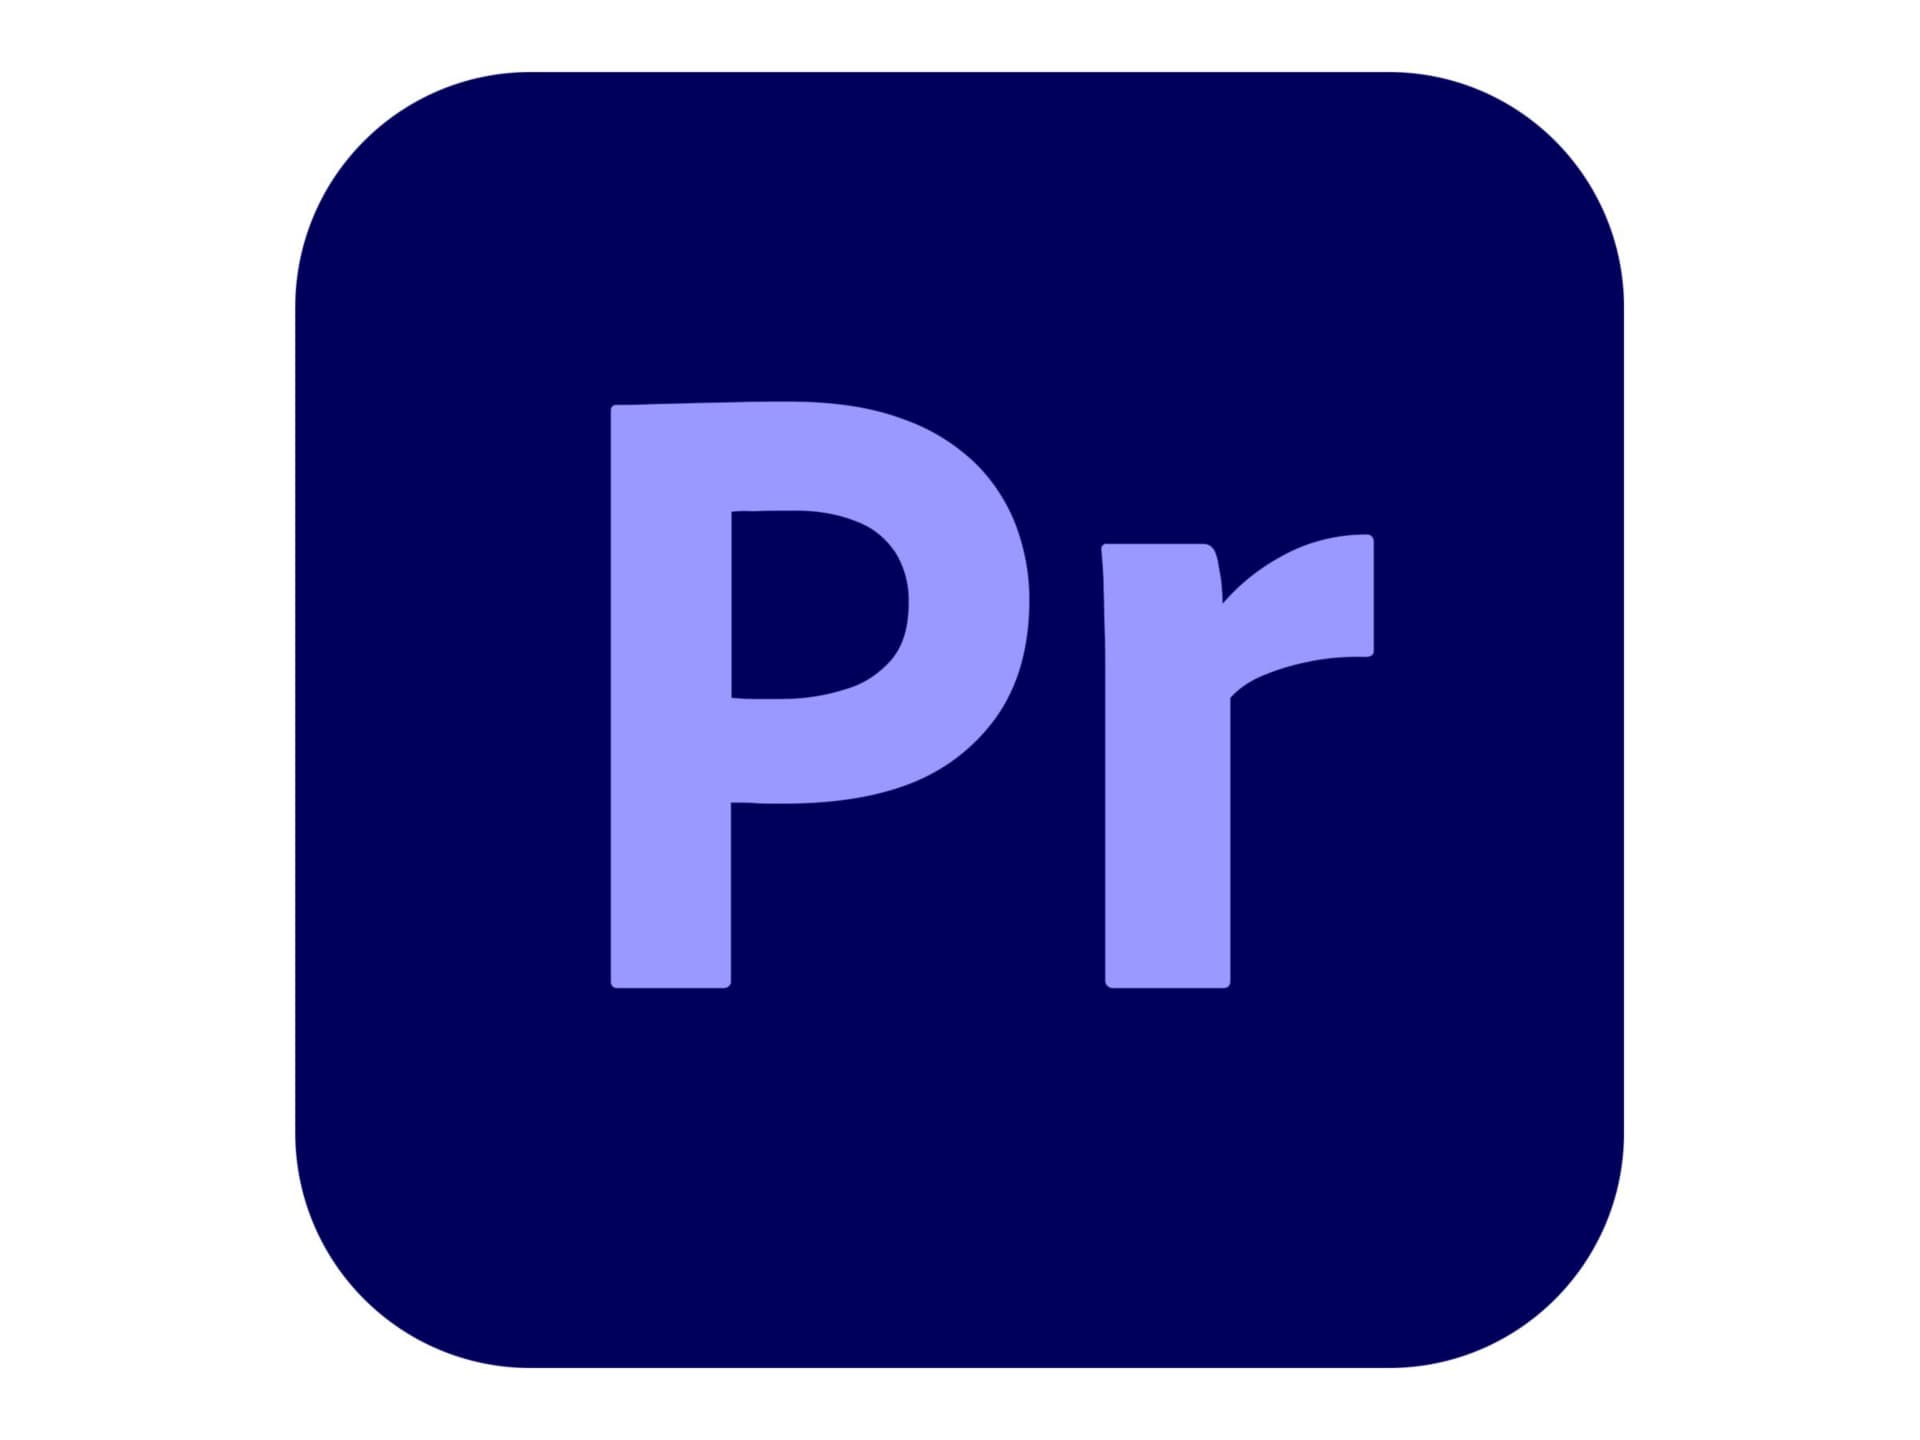 Adobe Premiere Pro CC for teams - Subscription New (3 months) - 1 named user